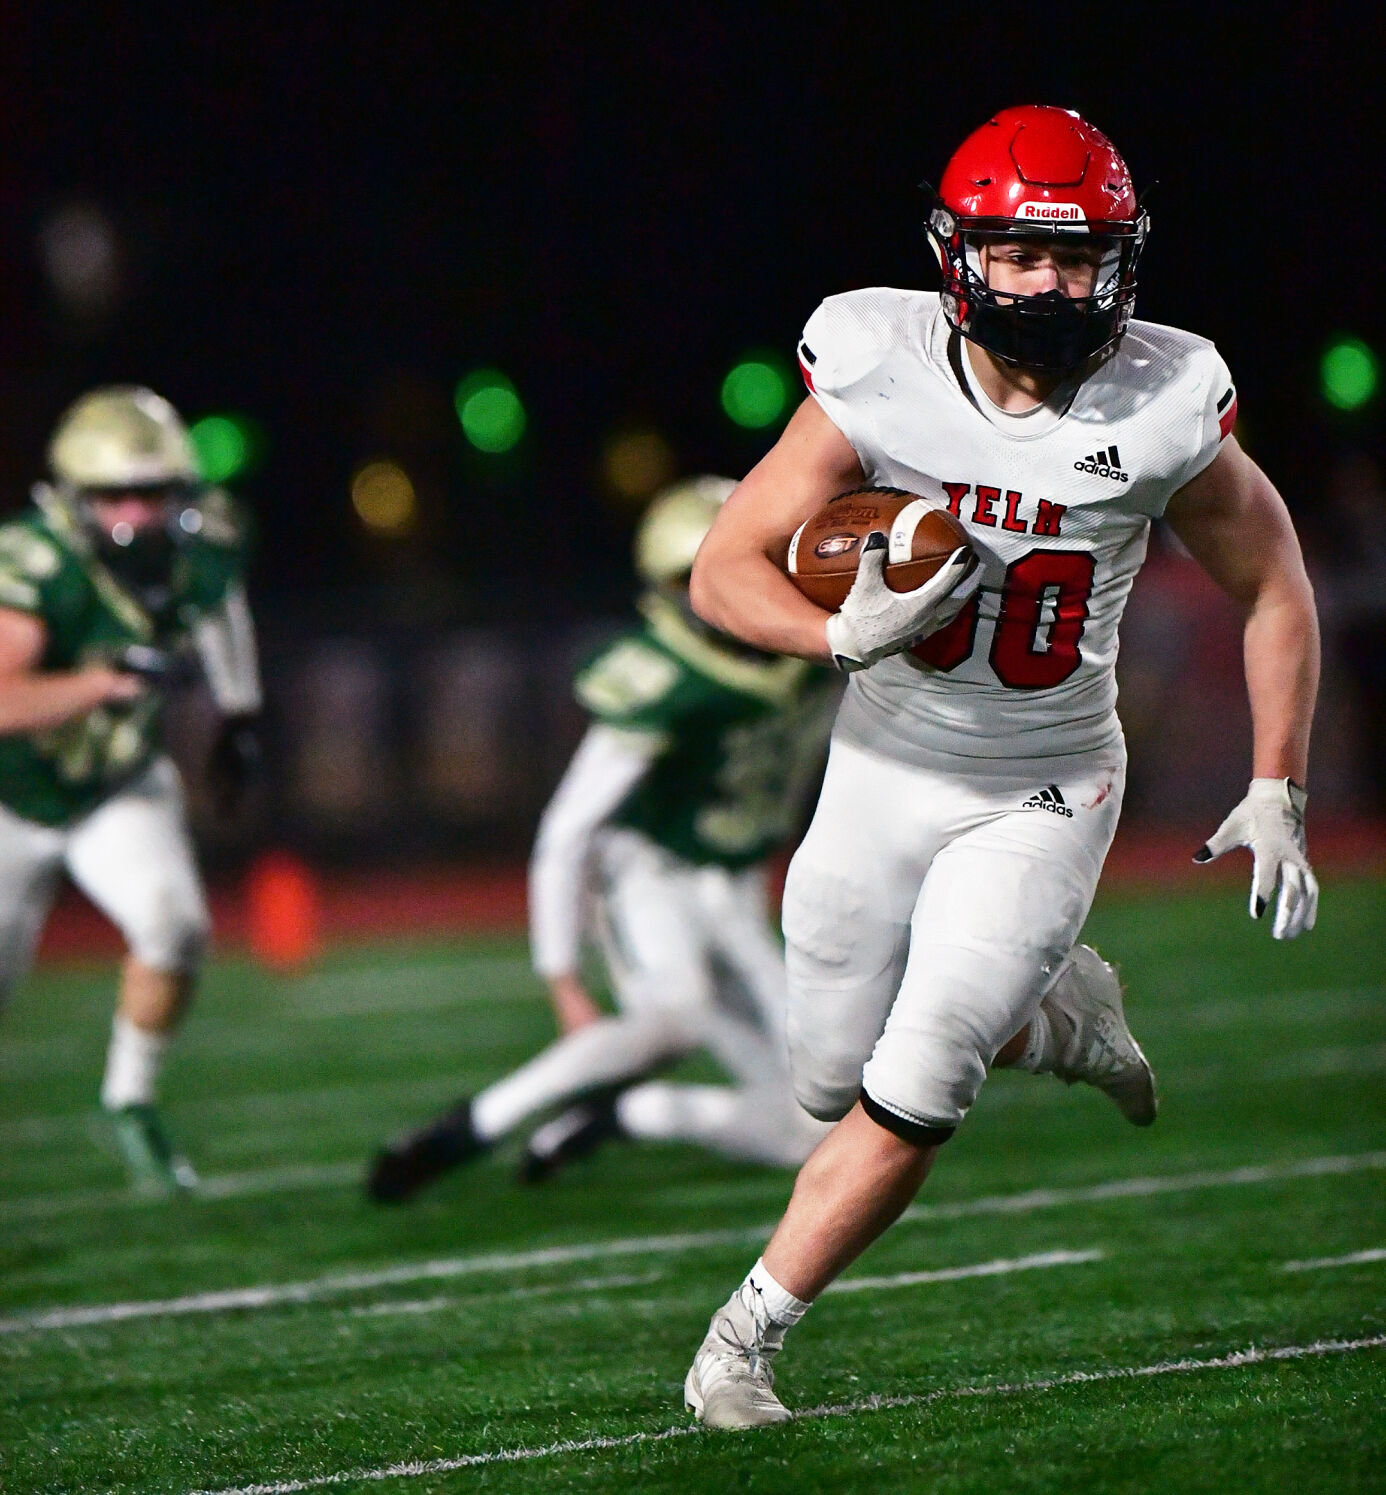 Yelm High School running back William Carreto gallops for a big gain on Friday, March 12, against Timberline High School at South Sound Stadium.